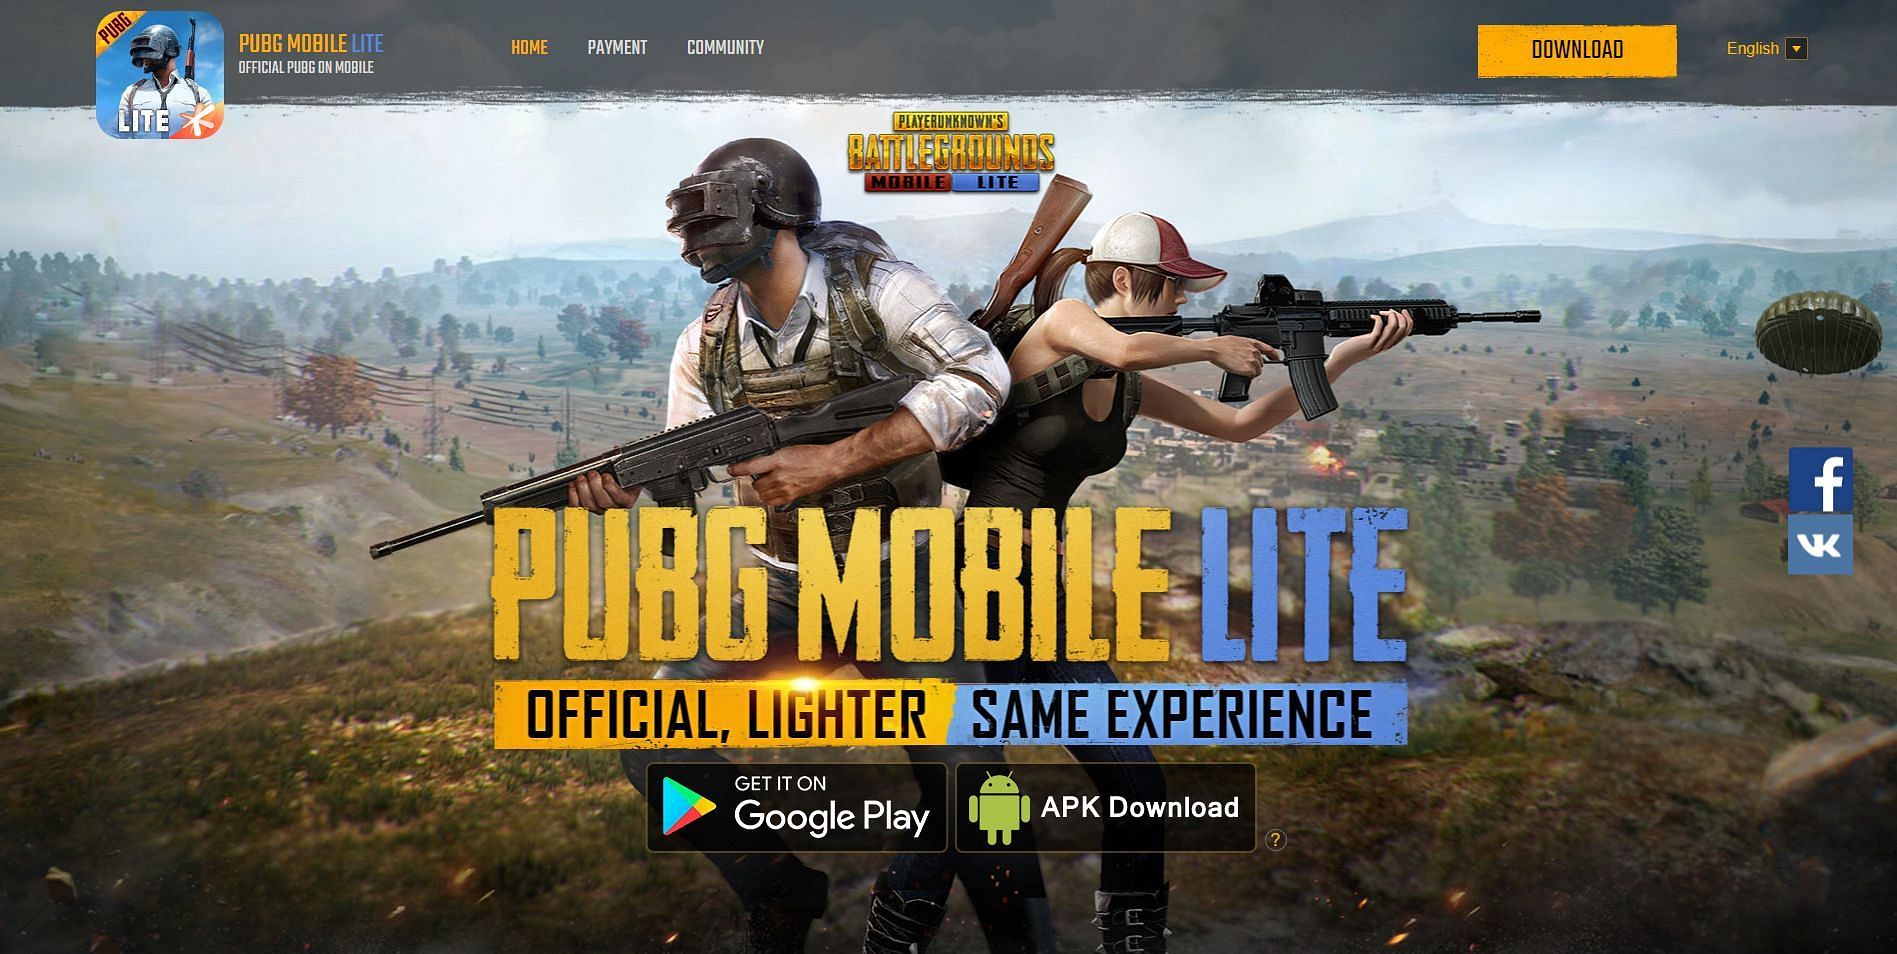 You can visit the official website of the game to download the APK file (Image via Tencent)